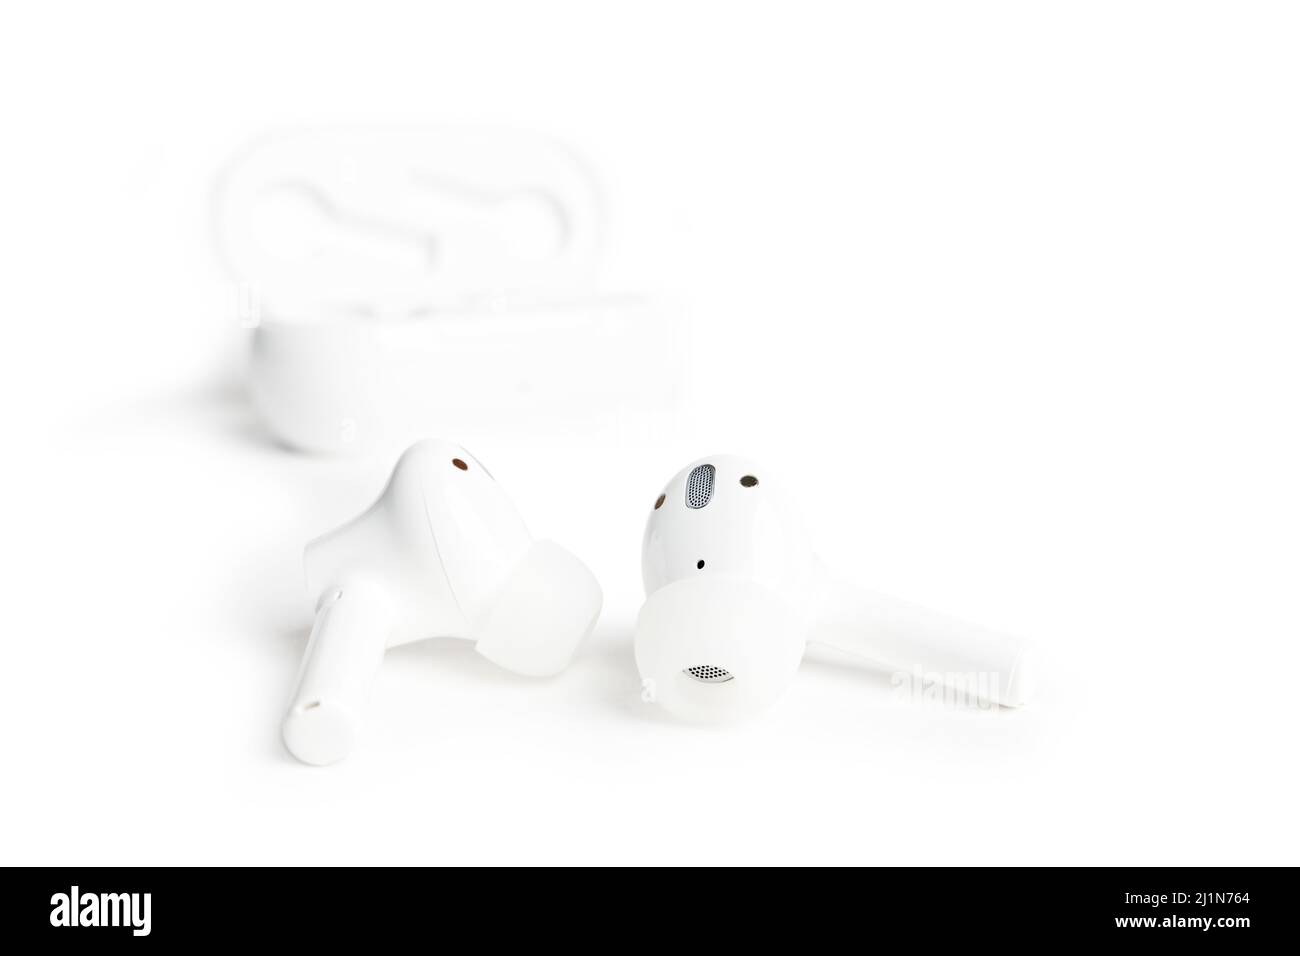 Closeup abstract white TWS (true wireless stereo) earbuds isolated on white background. Shallow focus. Stock Photo